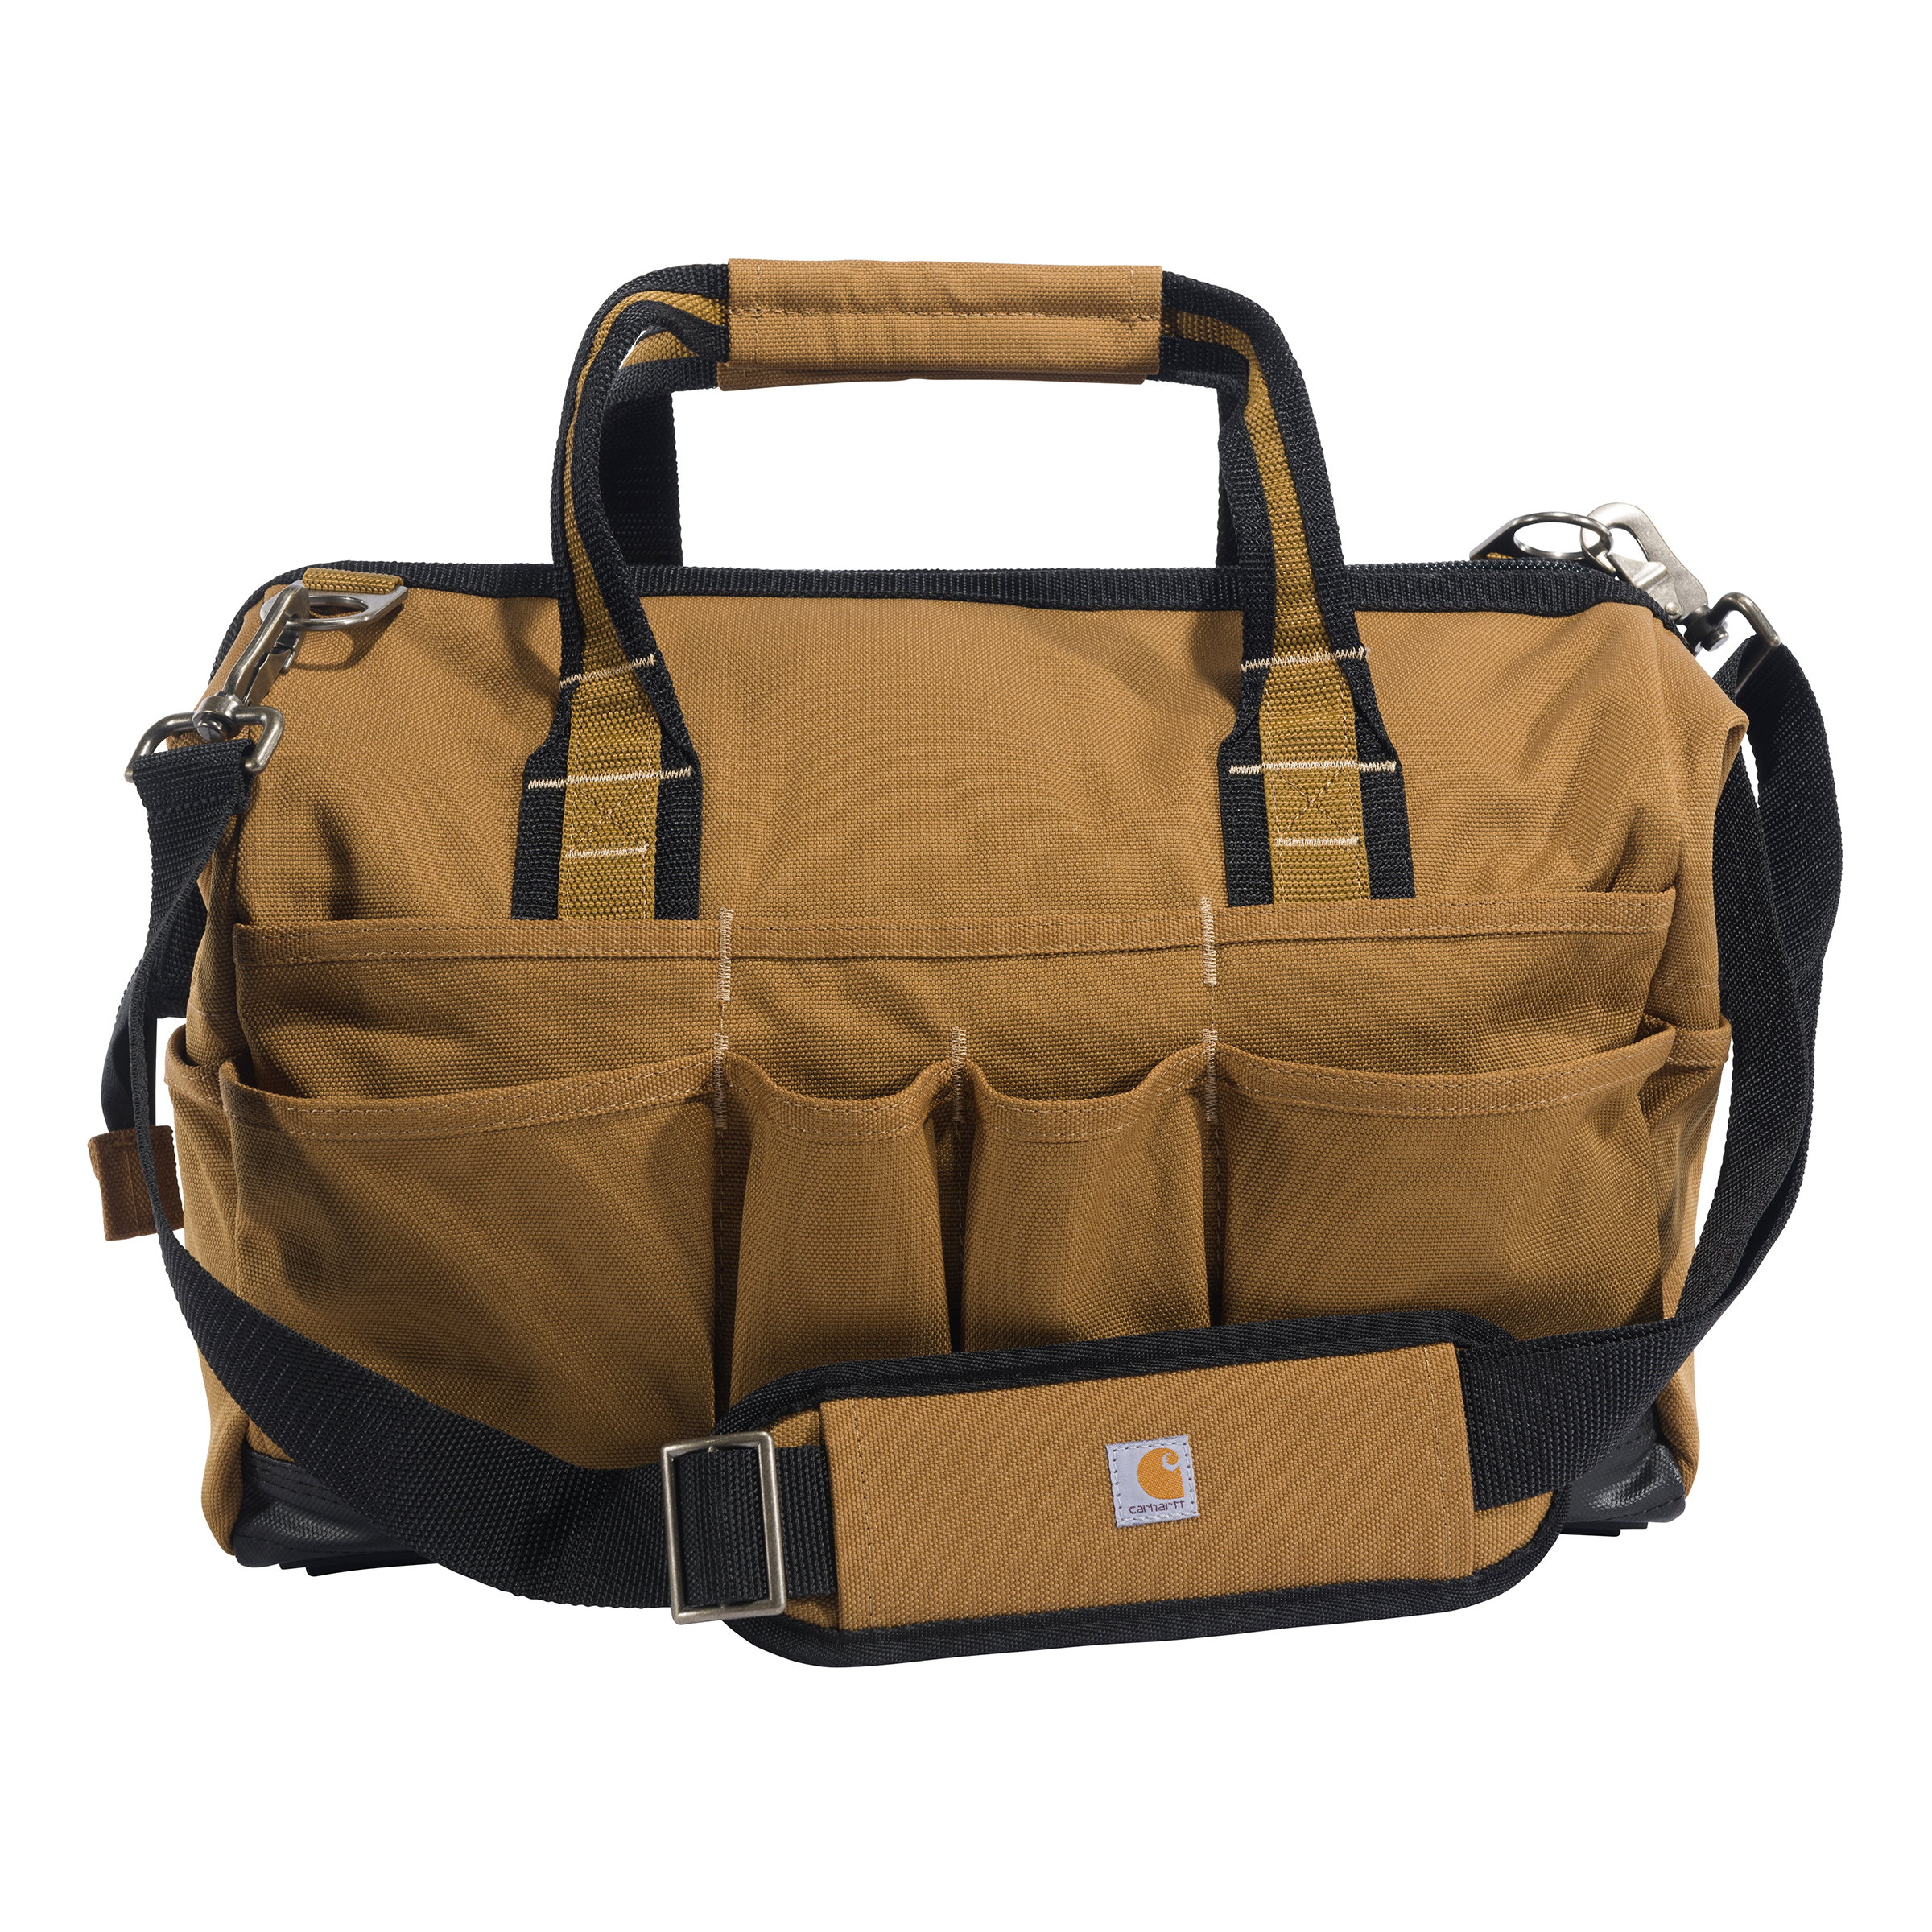 Picture of Carhartt B0000352 Mens 16-Inch 30 Pocket Heavyweight Tool Bag